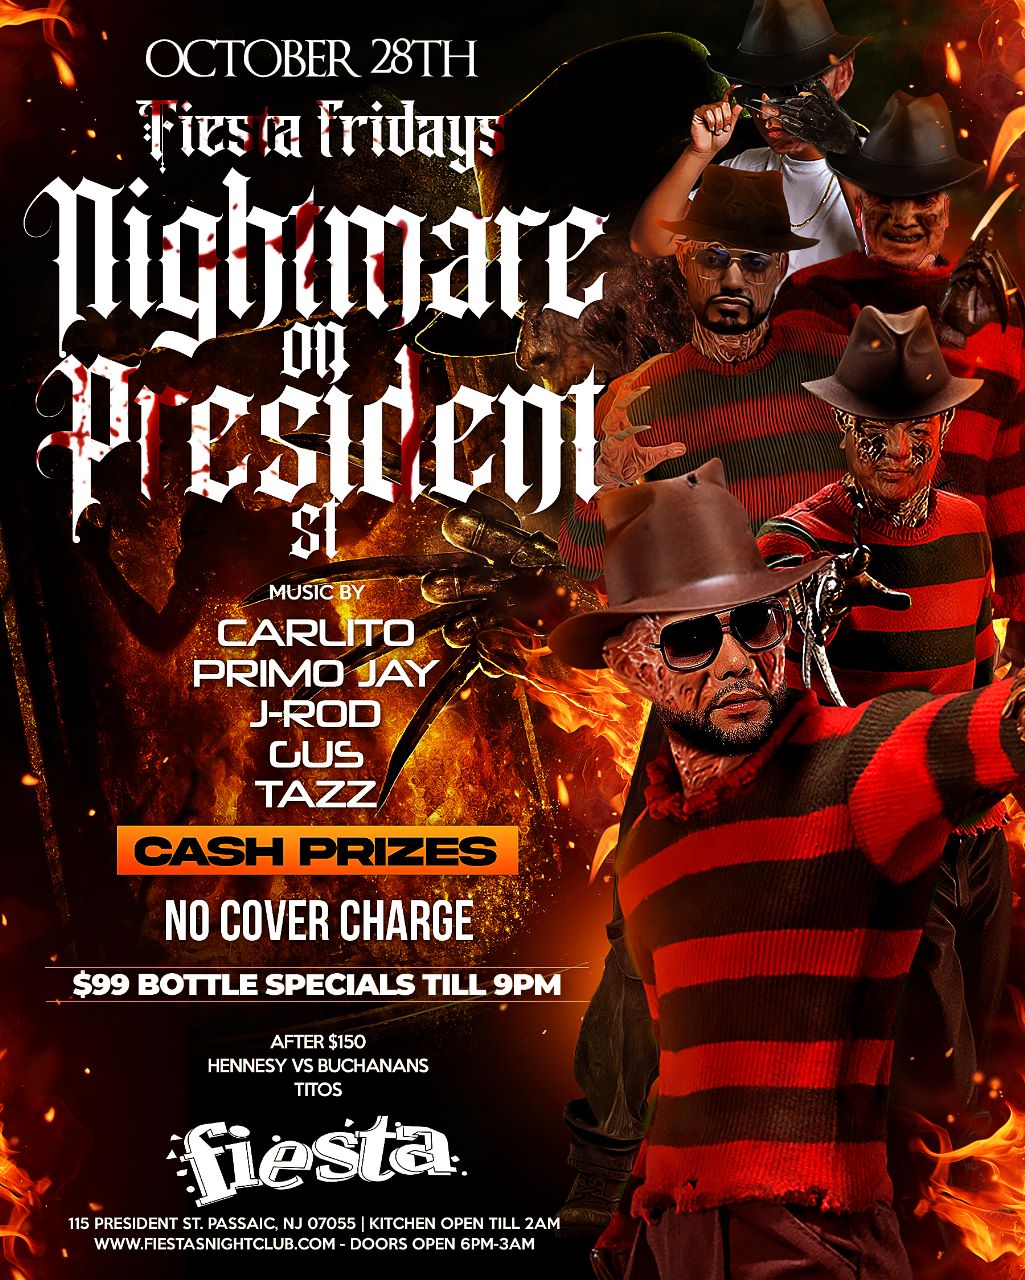 NIGHTMARE ON PRESIDENT ST. BY FIESTA FRIDAYS * NO COVER CHARGE